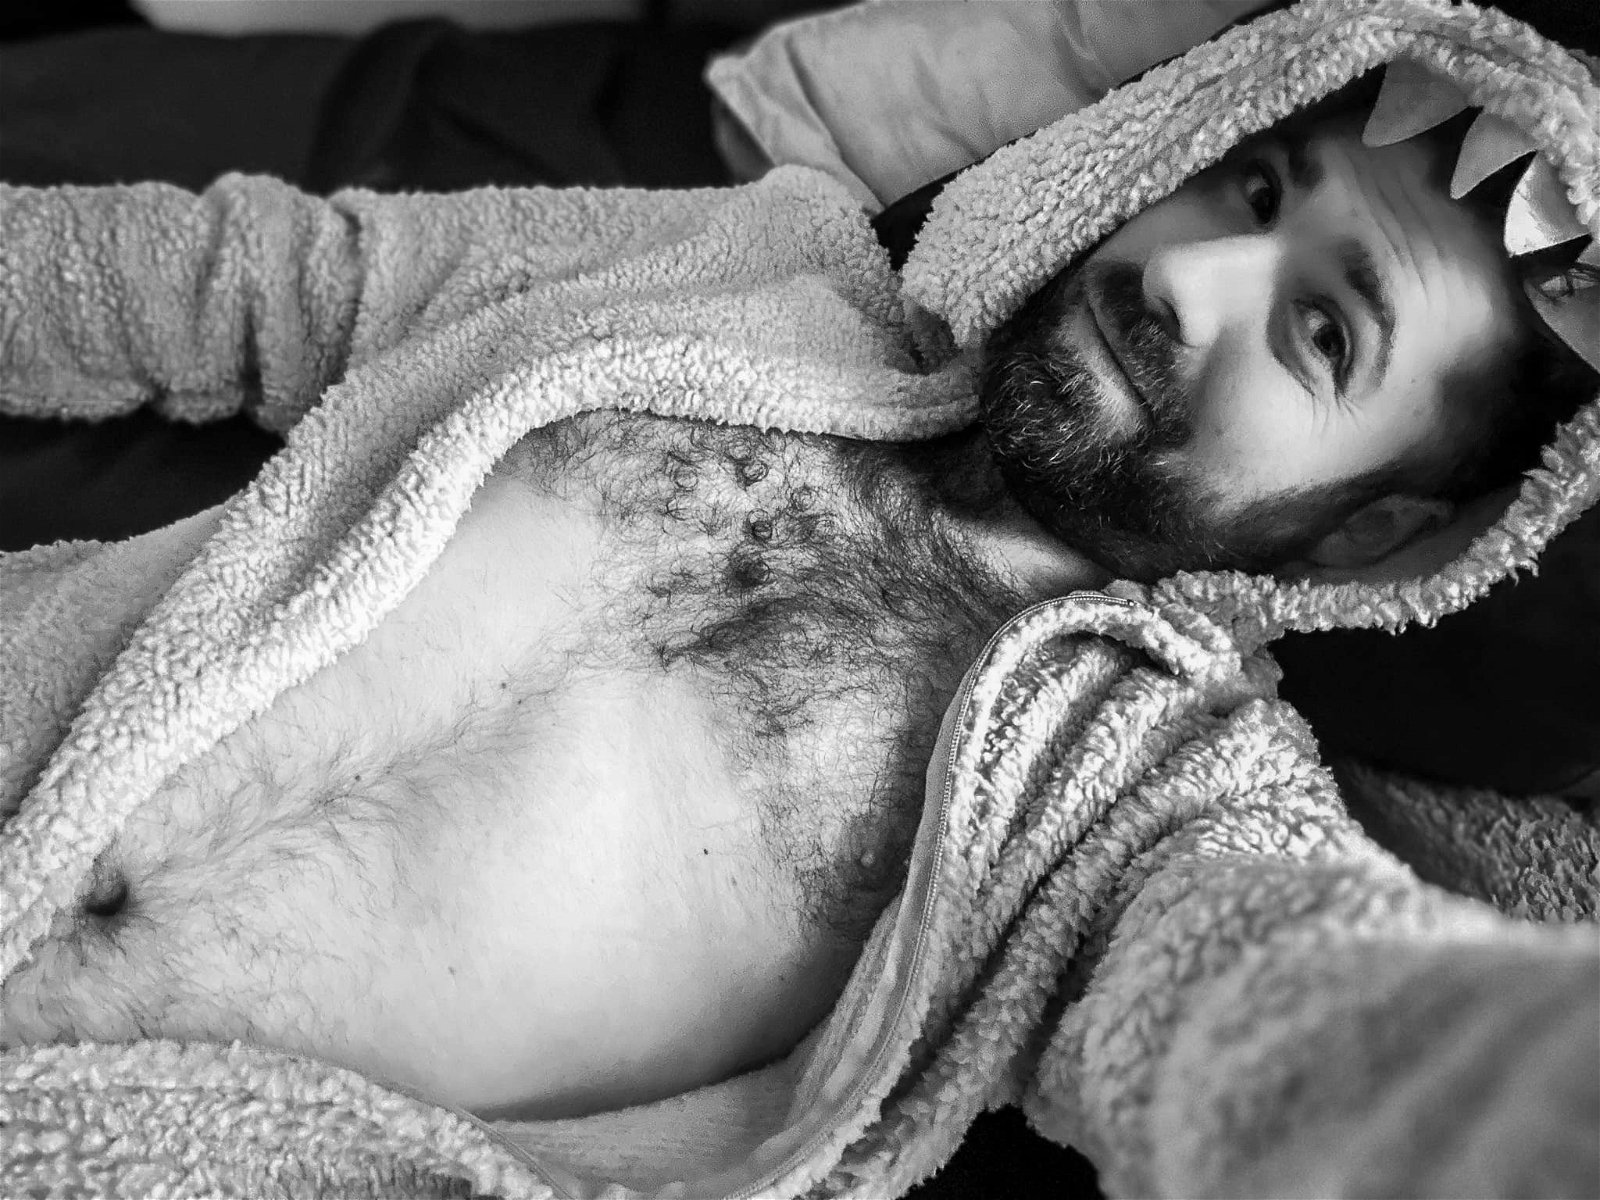 Watch the Photo by DirtyDaddyFunStuff with the username @DirtyDaddyPorn, who is a verified user, posted on January 7, 2024 and the text says '#hairy #muscles #beards #bears #santa #christmas #shaving #stubble'